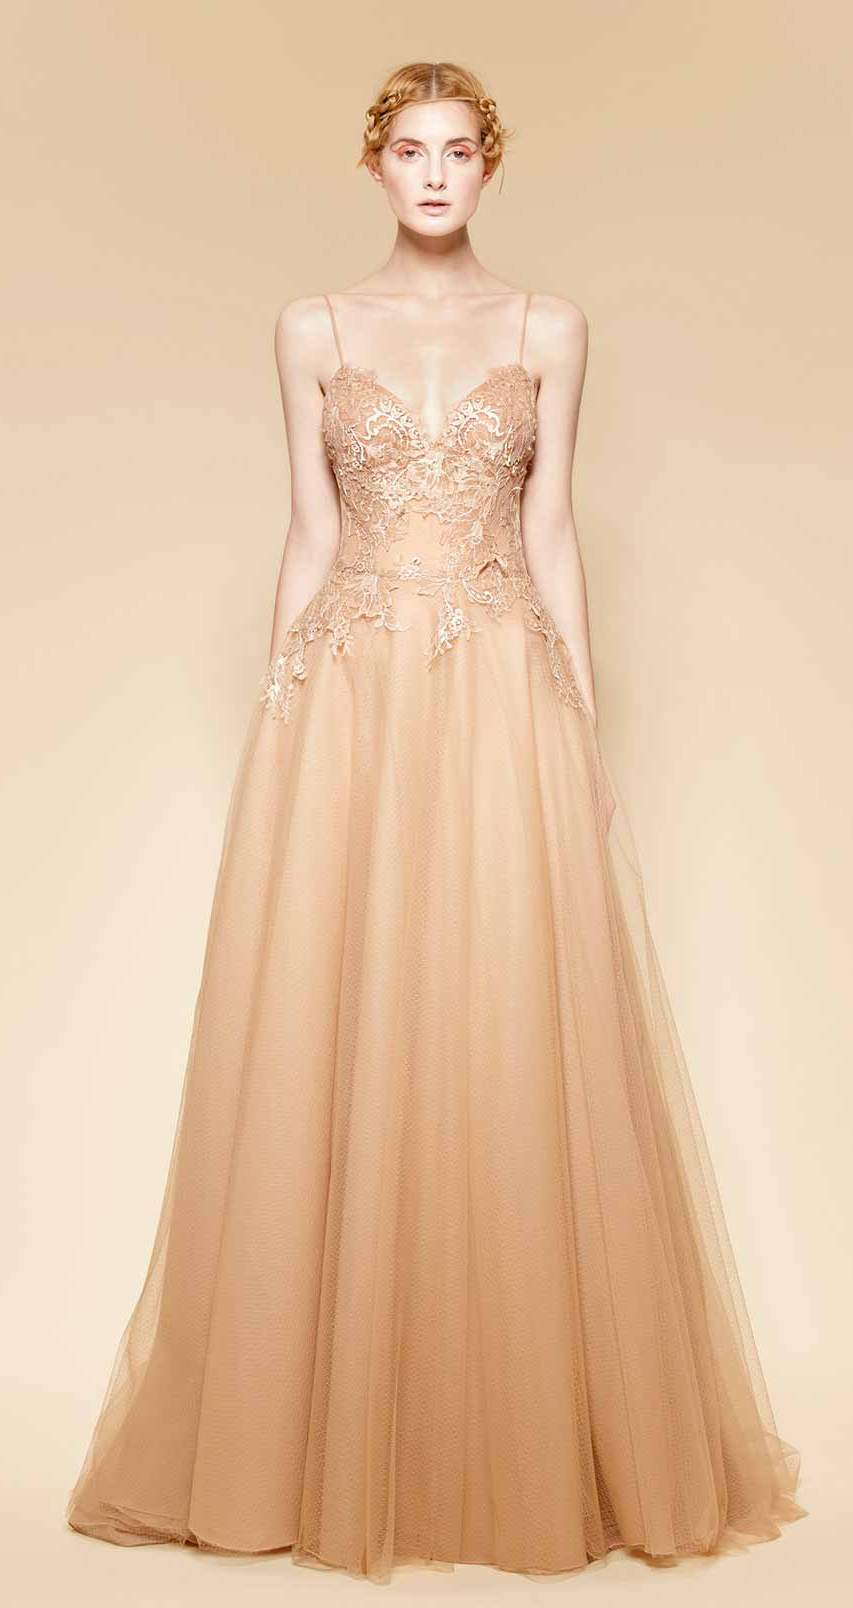 Couture nude lace dress with an ethereal and delicate silhouette